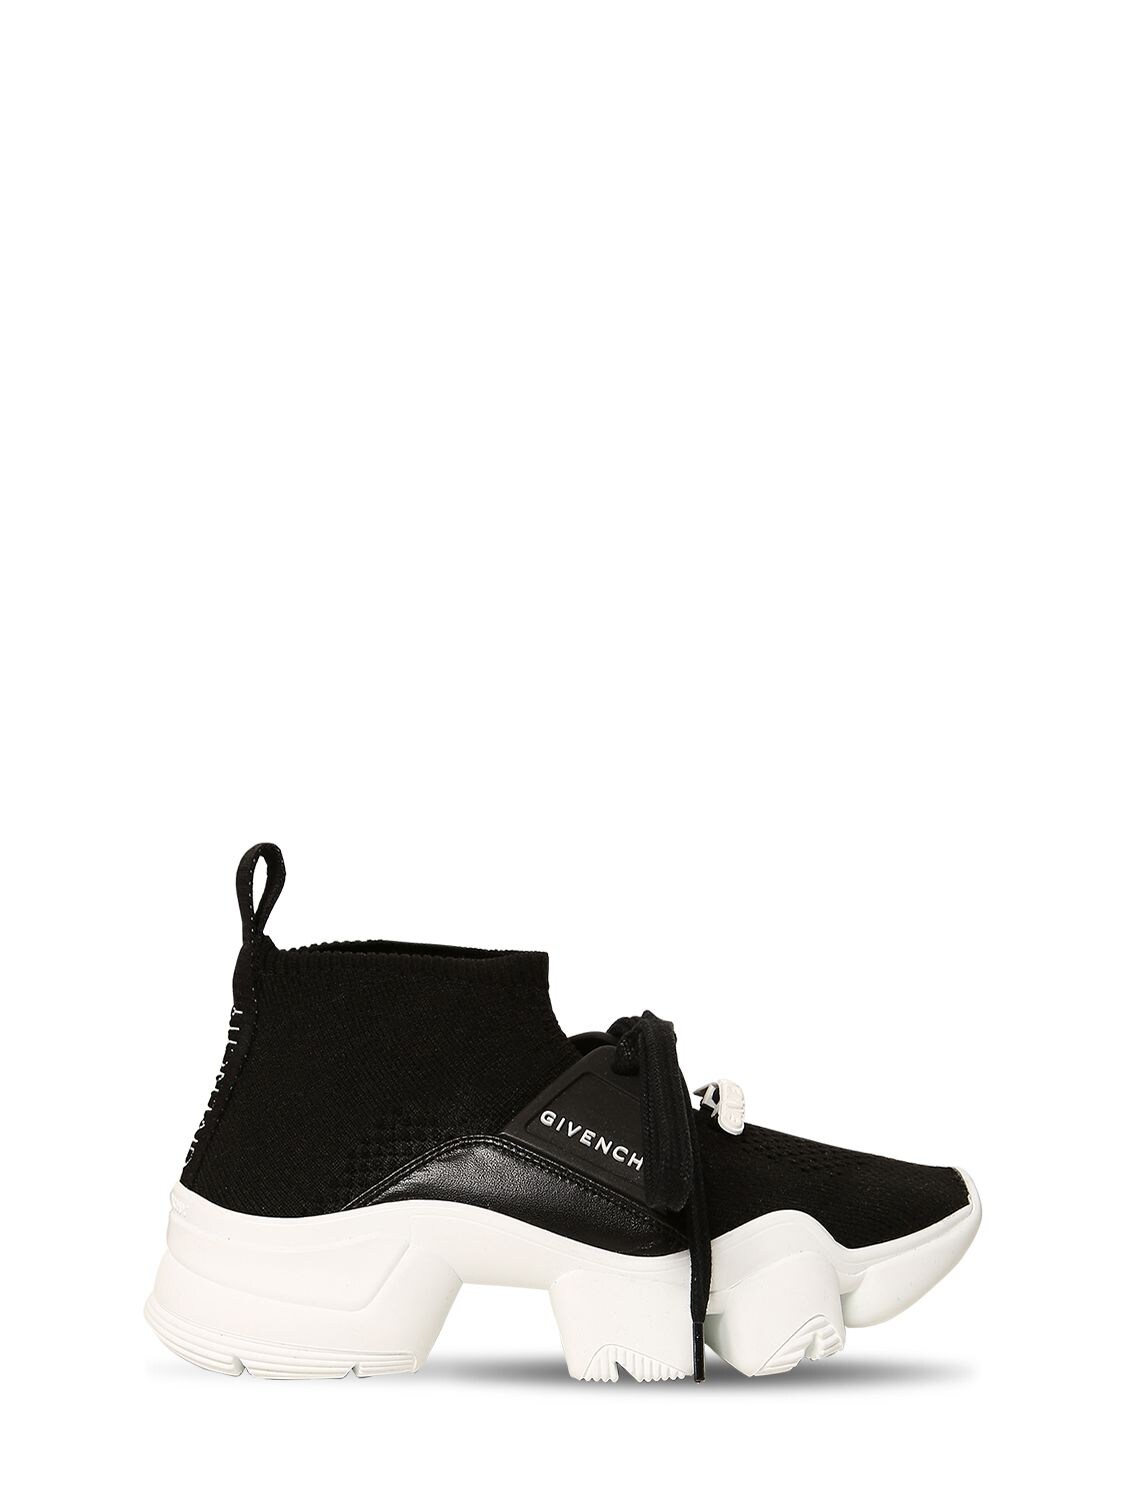 GIVENCHY KNIT SLIP-ON trainers,71IOFK101-MDLC0